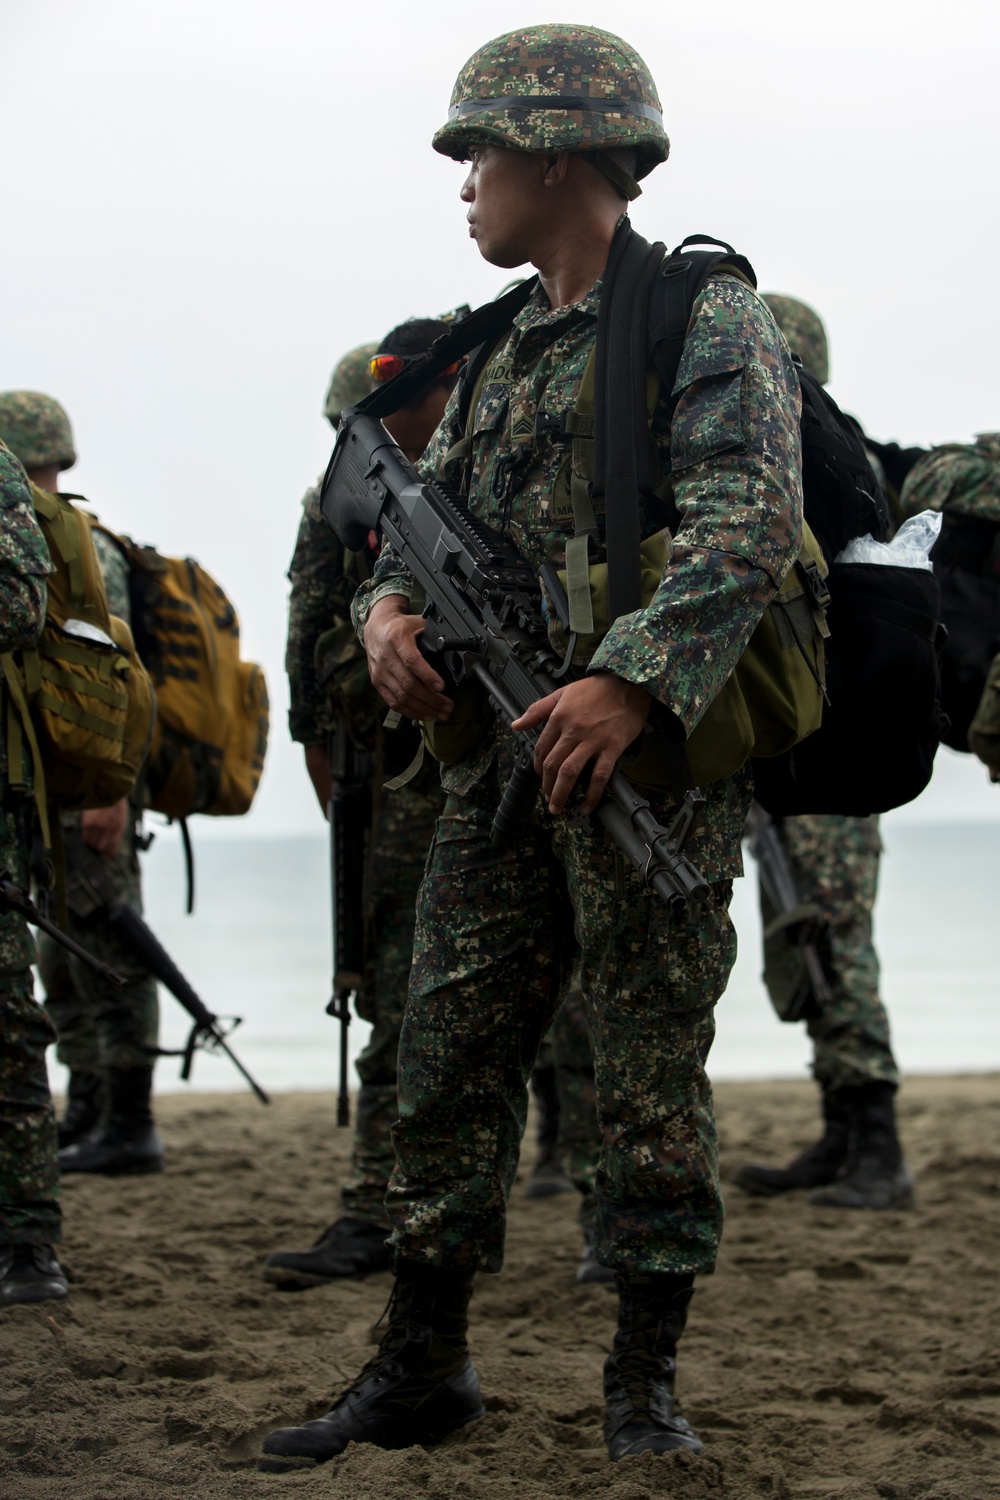 Philippine service members ride on a LCAC during PHIBLEX 15